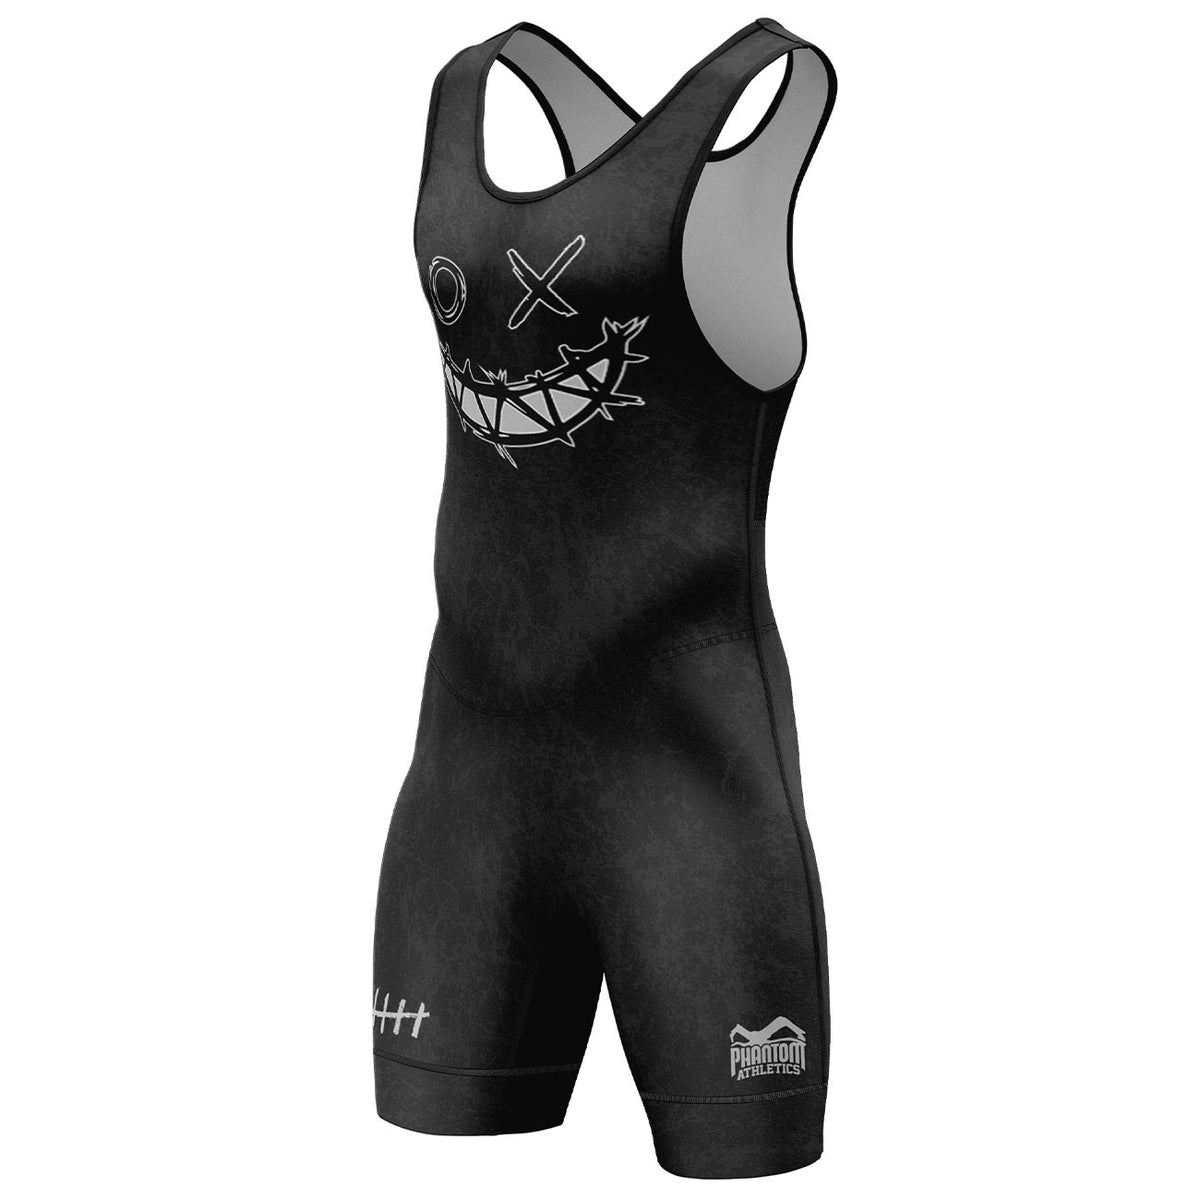 Phantom SERIOUS wrestling jersey. The ideal wrestling singlet for training and competition. According to UWW guidelines in the popular SERIOUS design. Perfect for your wrestling sport.